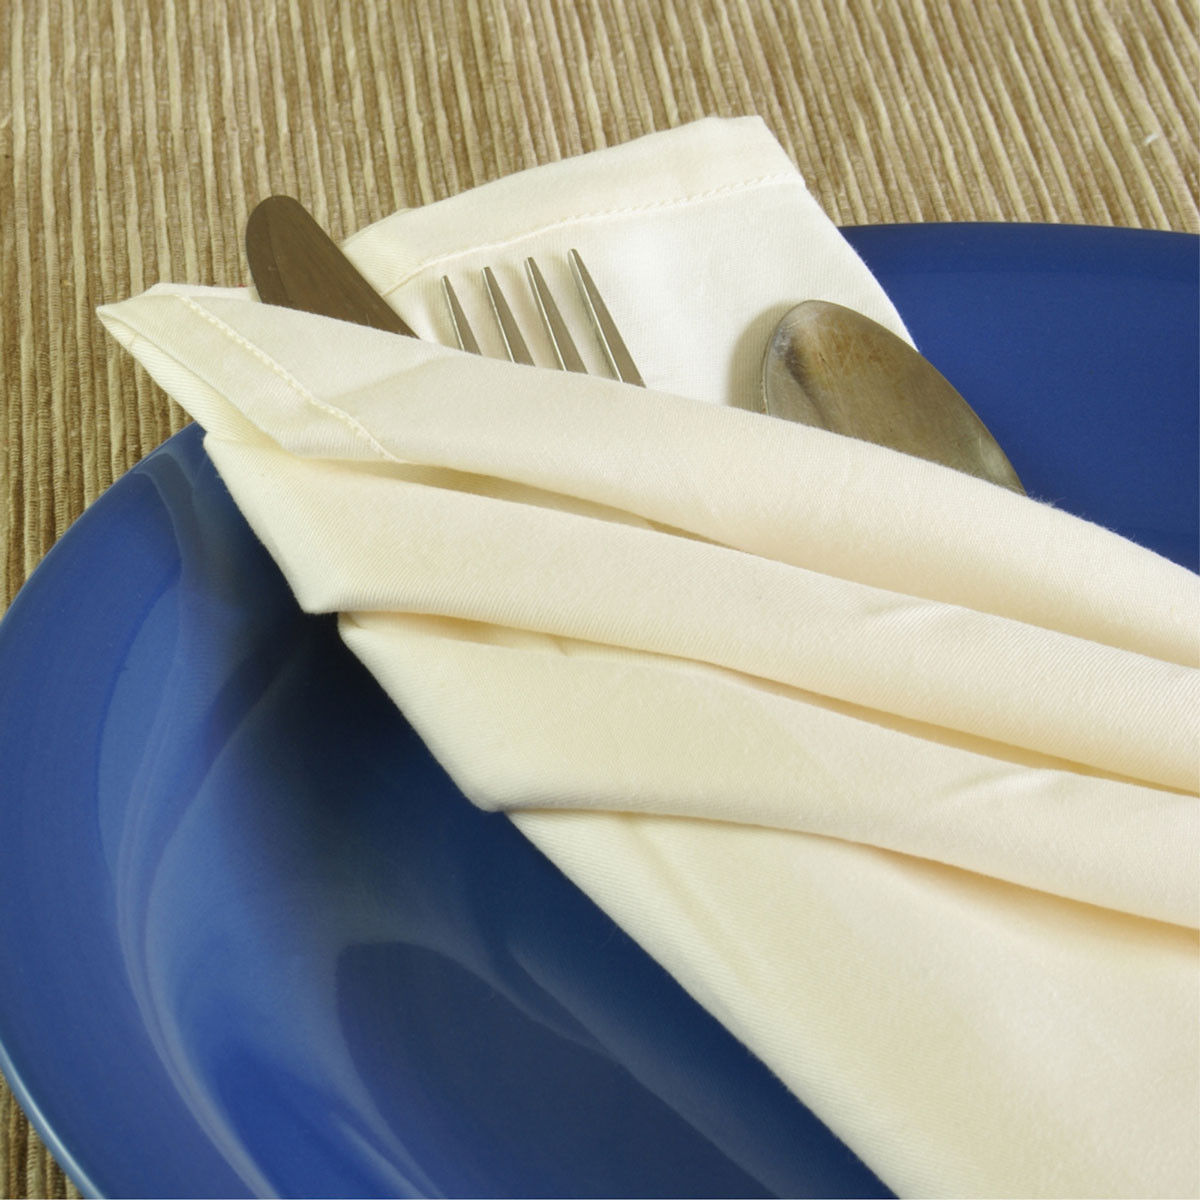 What specifications does the spun polyester fabric wholesale Infinity Napkins have?